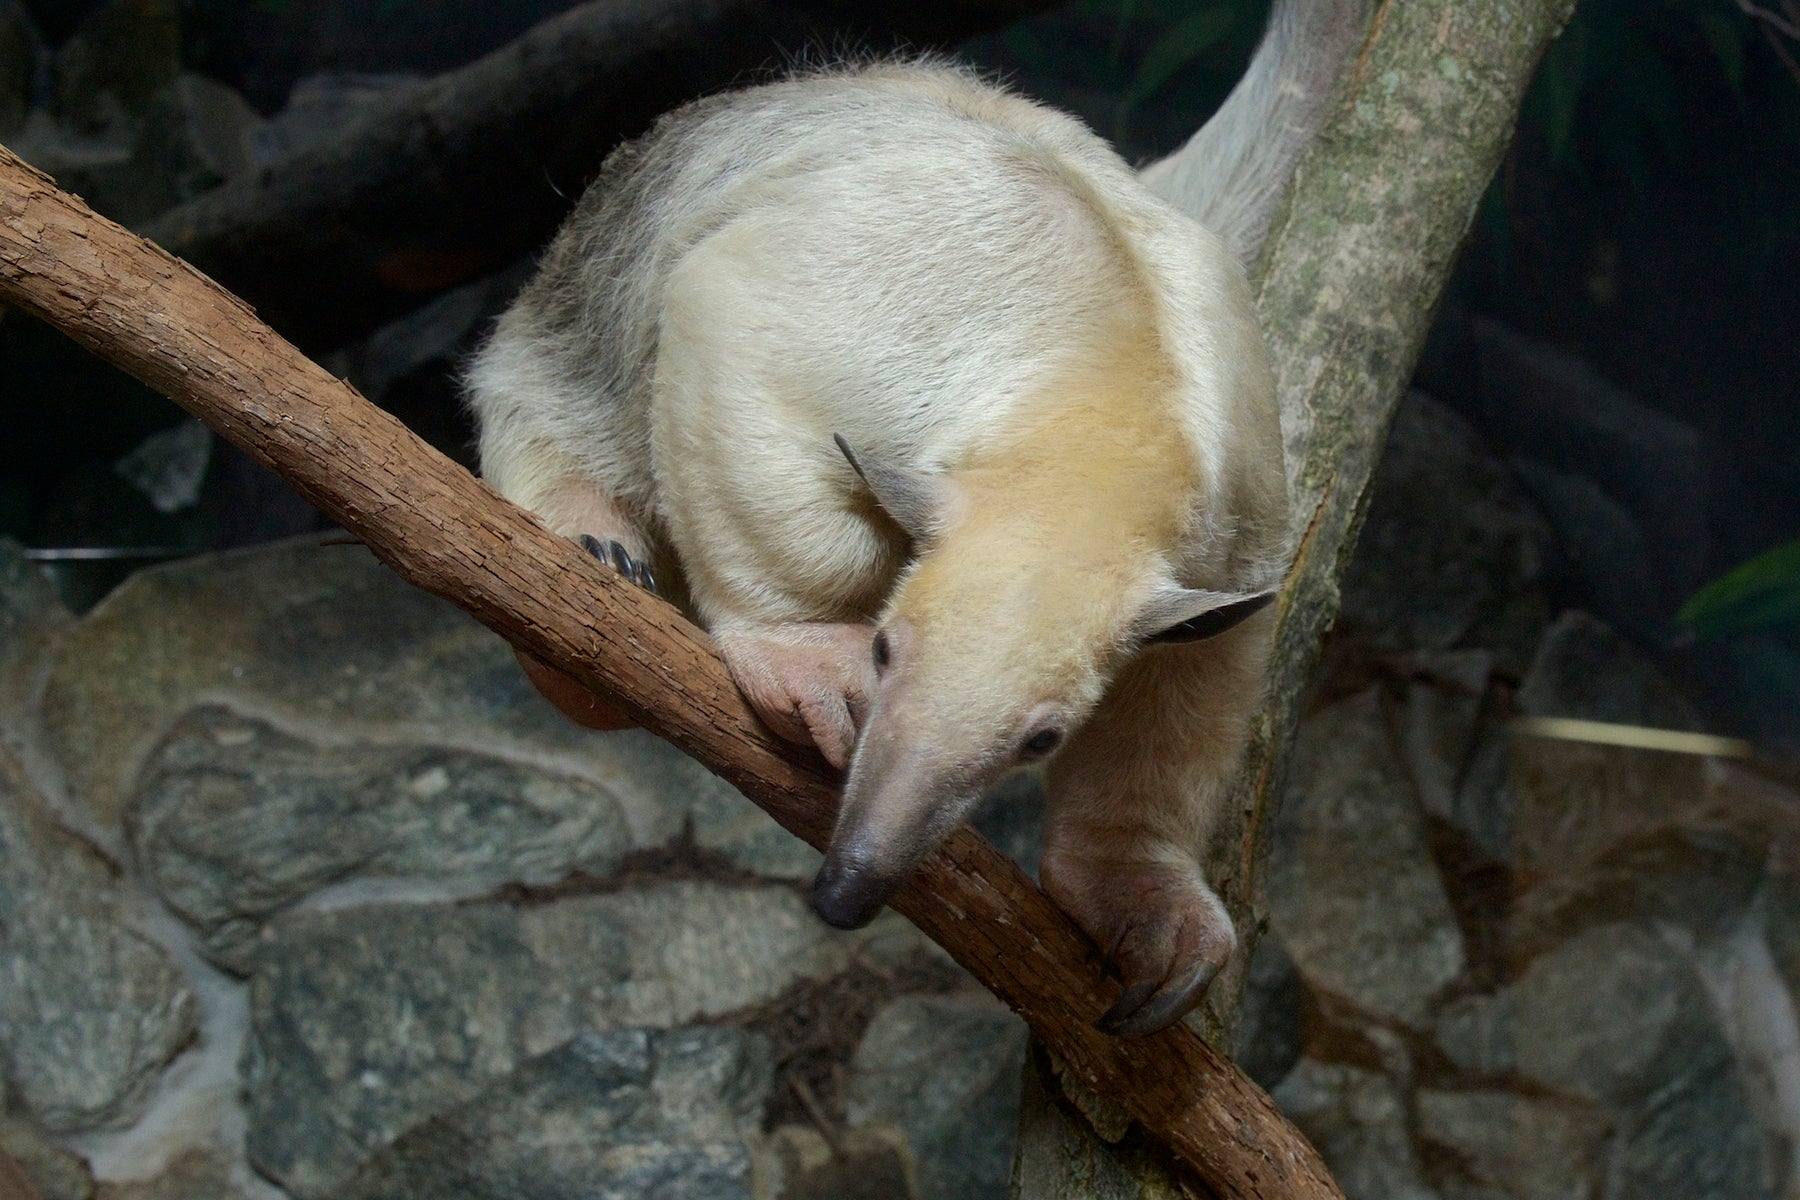 A photo of Cayenne, a southern tamandua, which is a tree-dwelling species of ant eater. Cayenne has light blond fur and strong, curved front claws.